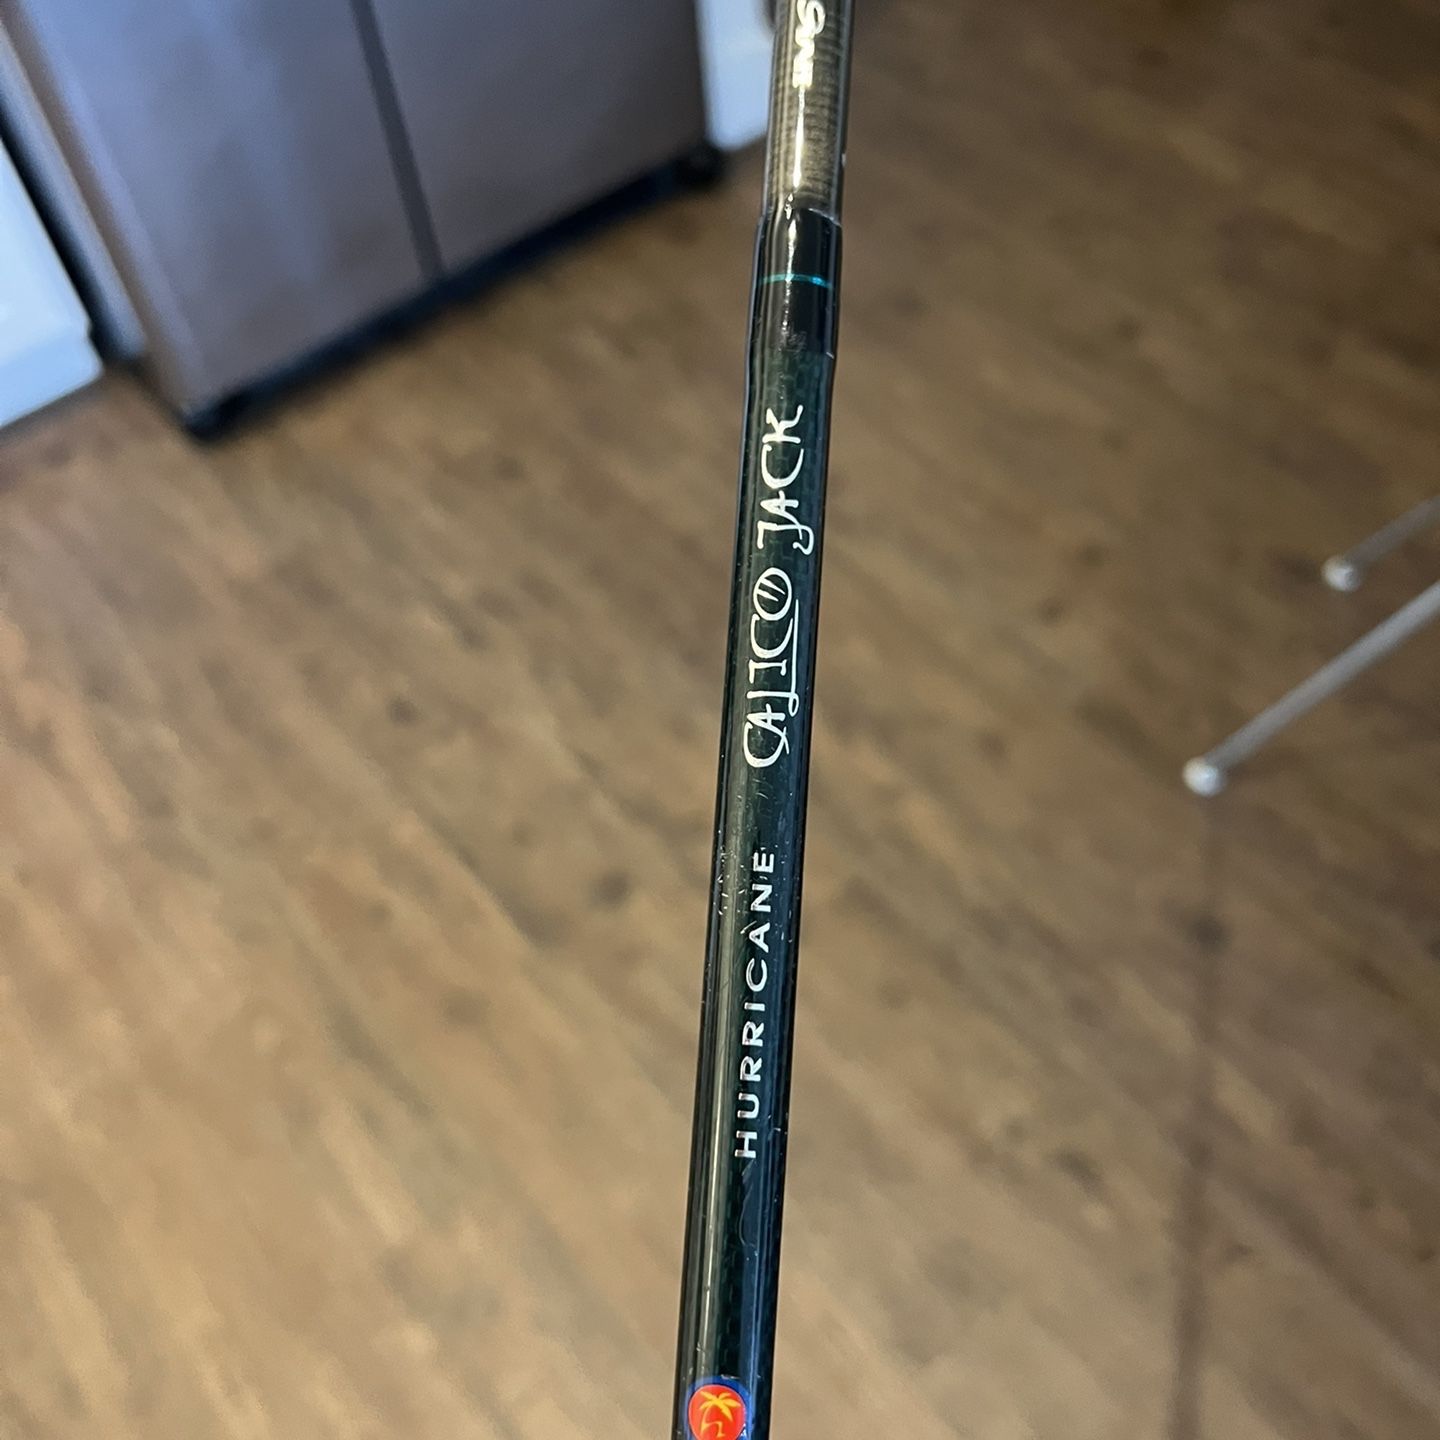 Fishing Rod Calico Jack Hurricane for Sale in North Palm Beach, FL - OfferUp